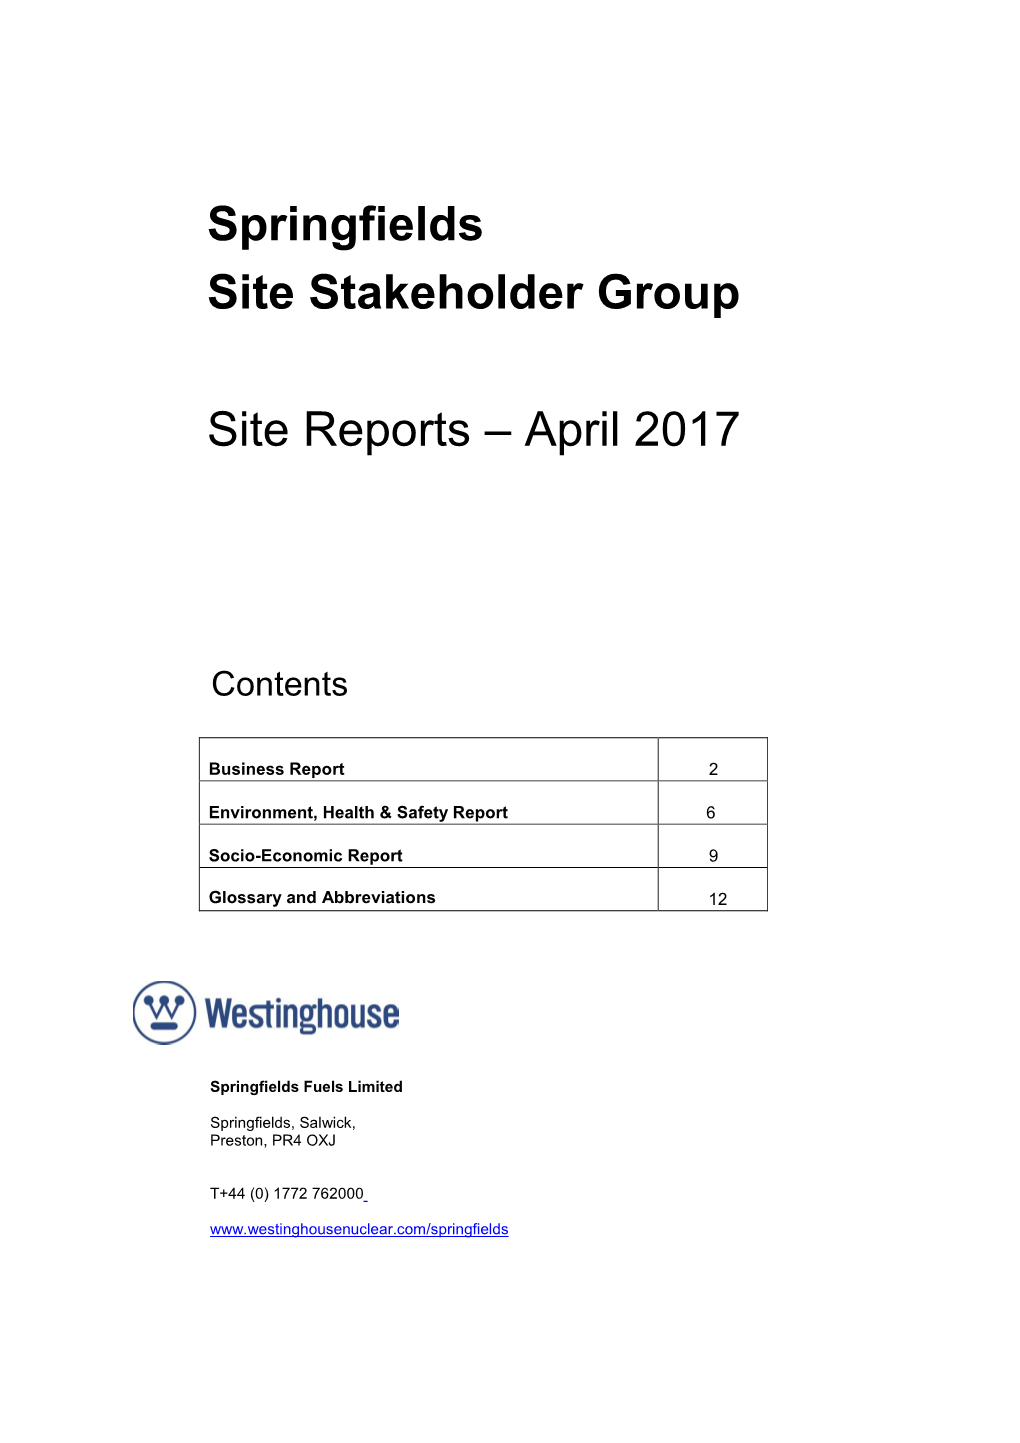 Springfields Site Stakeholder Group Site Reports – April 2017